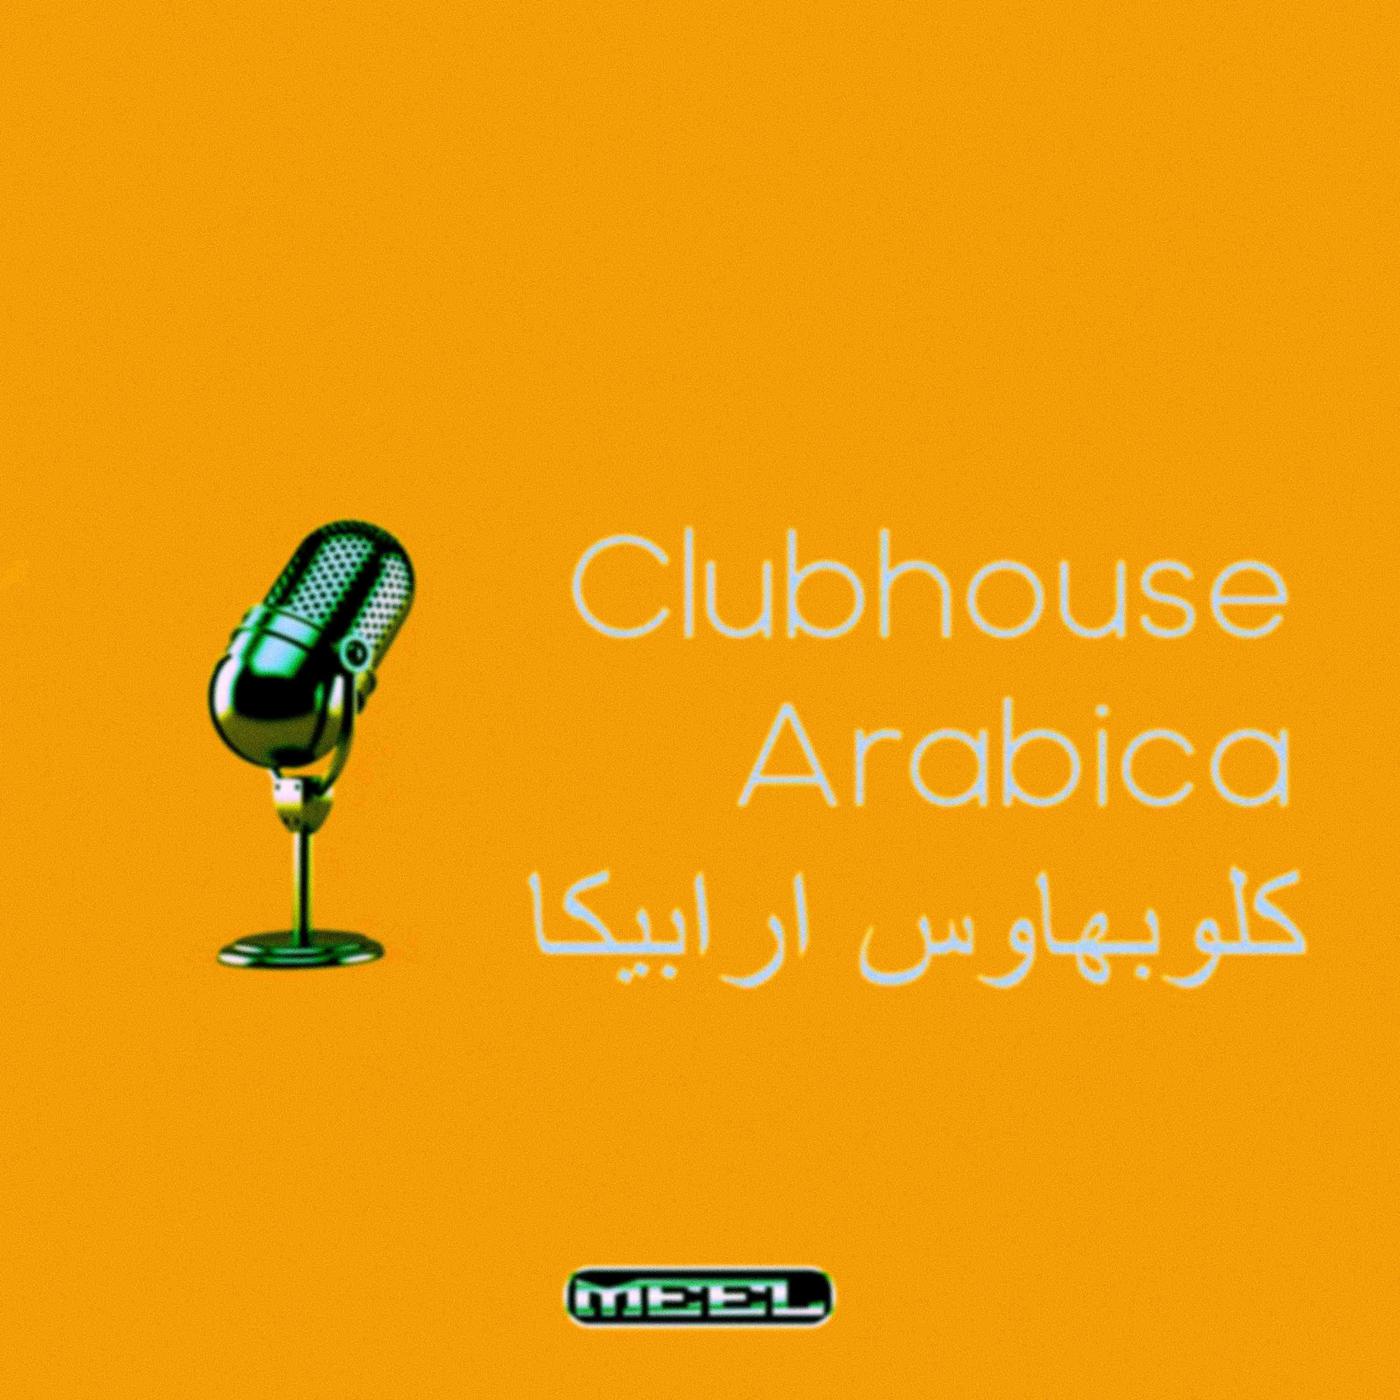 wp-content/uploads/2022/07/Clubhouse-Arabica.jpg